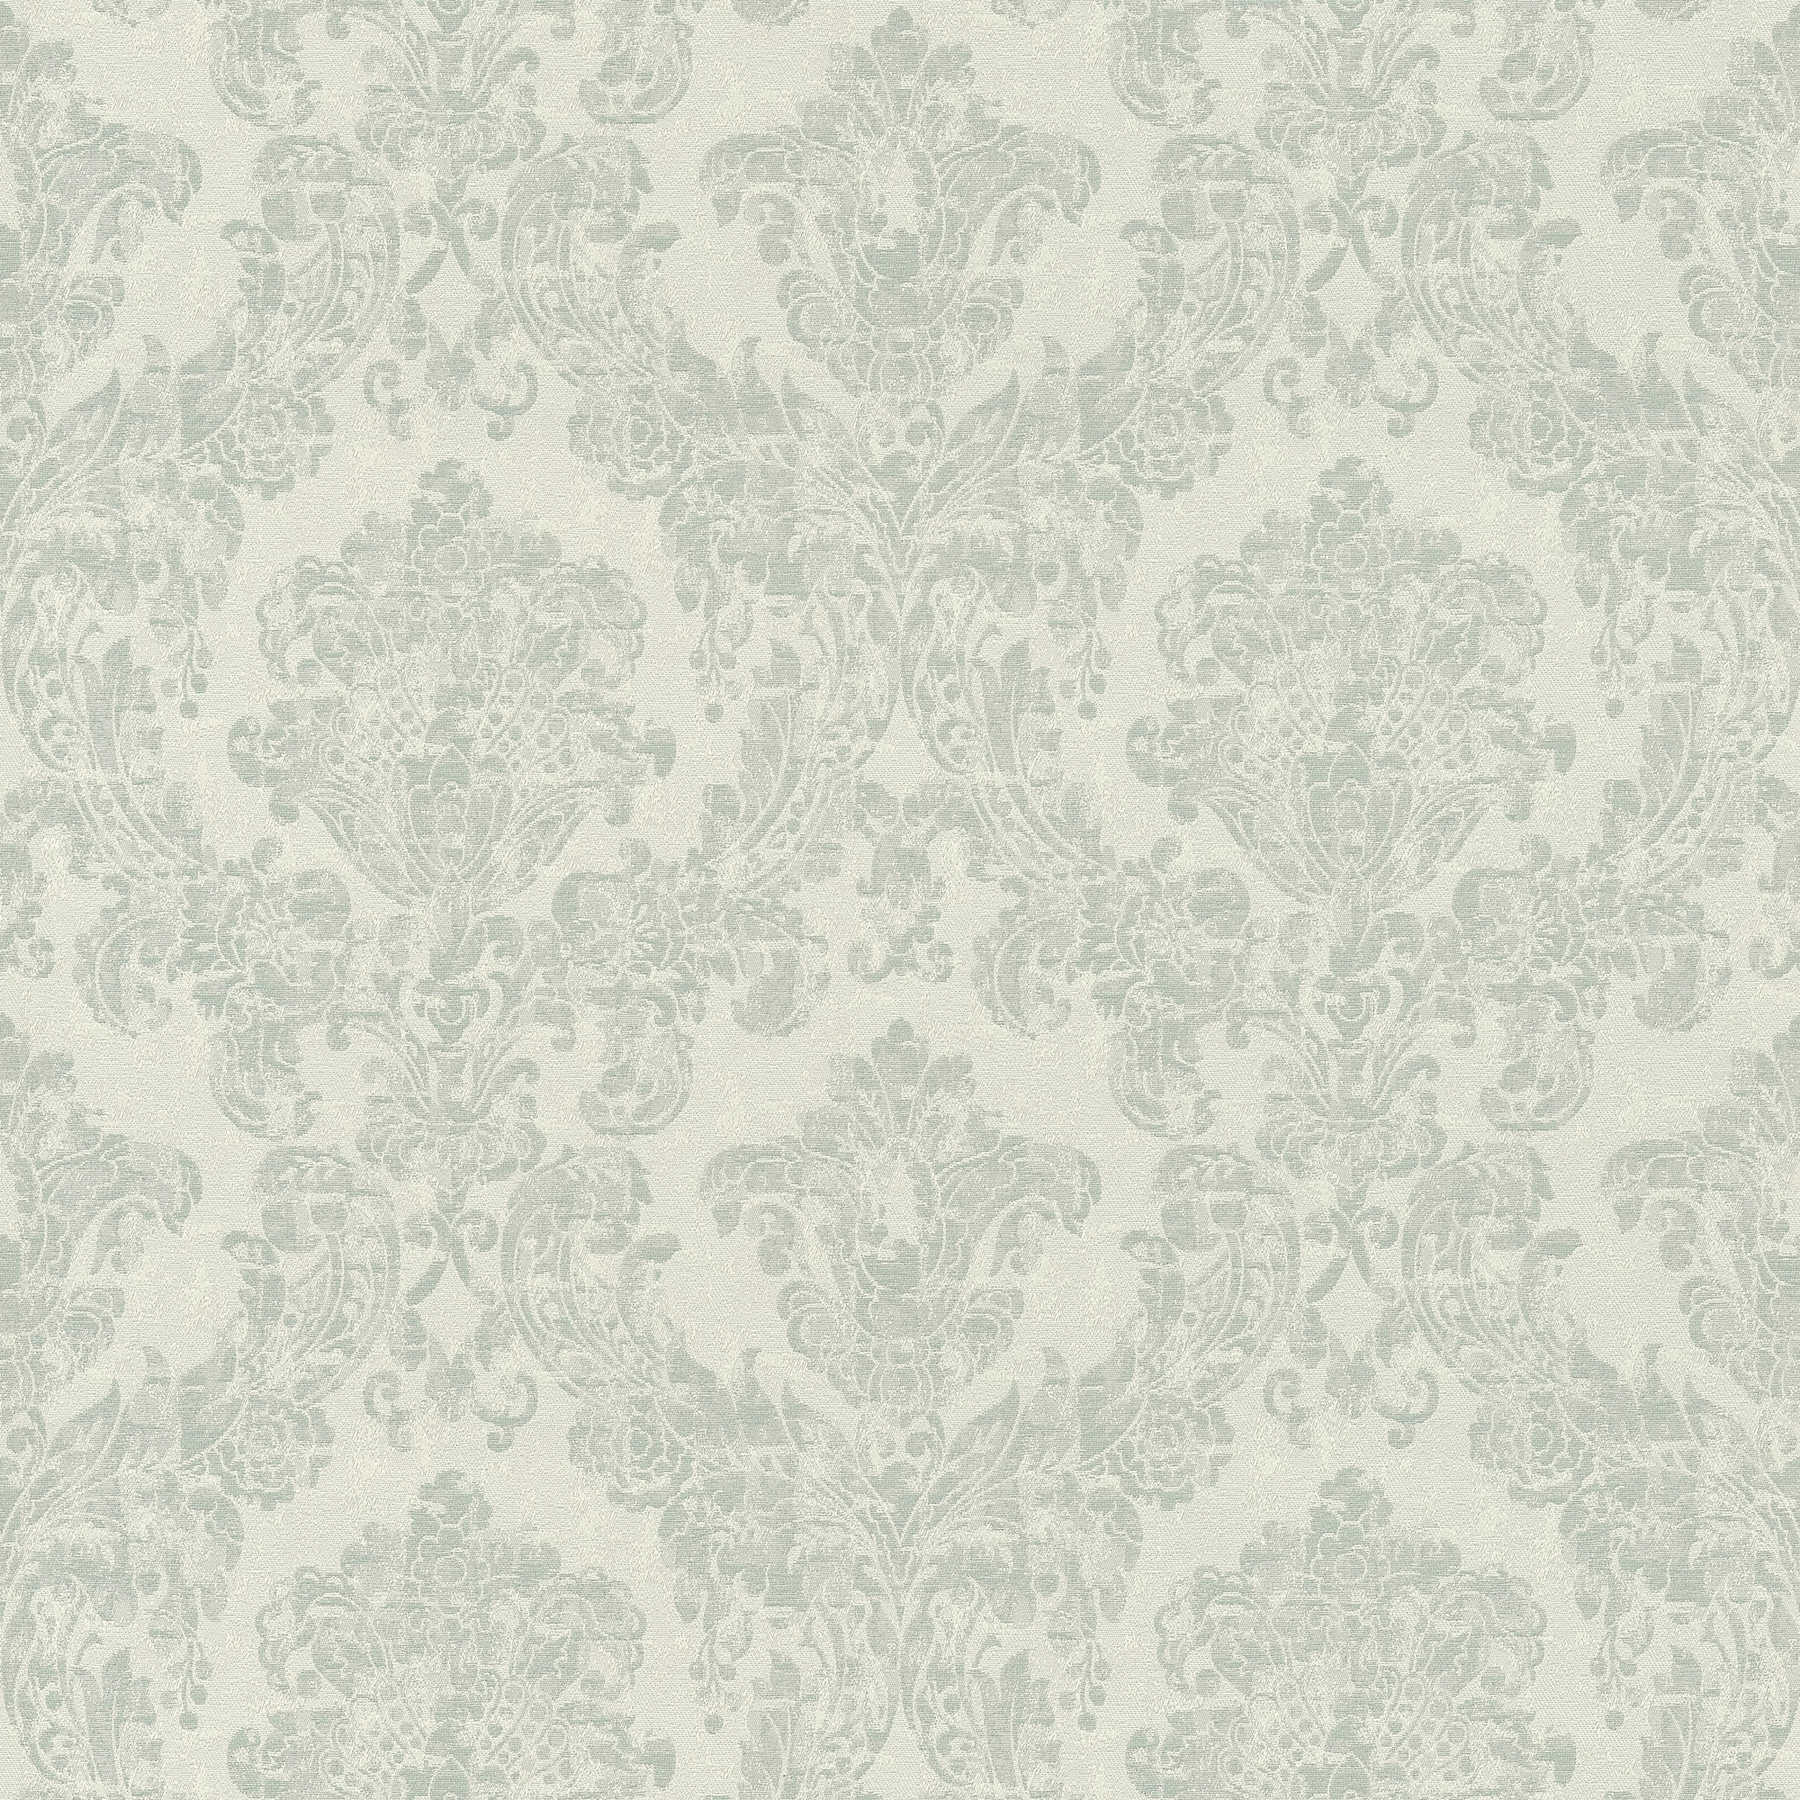 Vintage style wallpaper with ornamental pattern in used look - green
